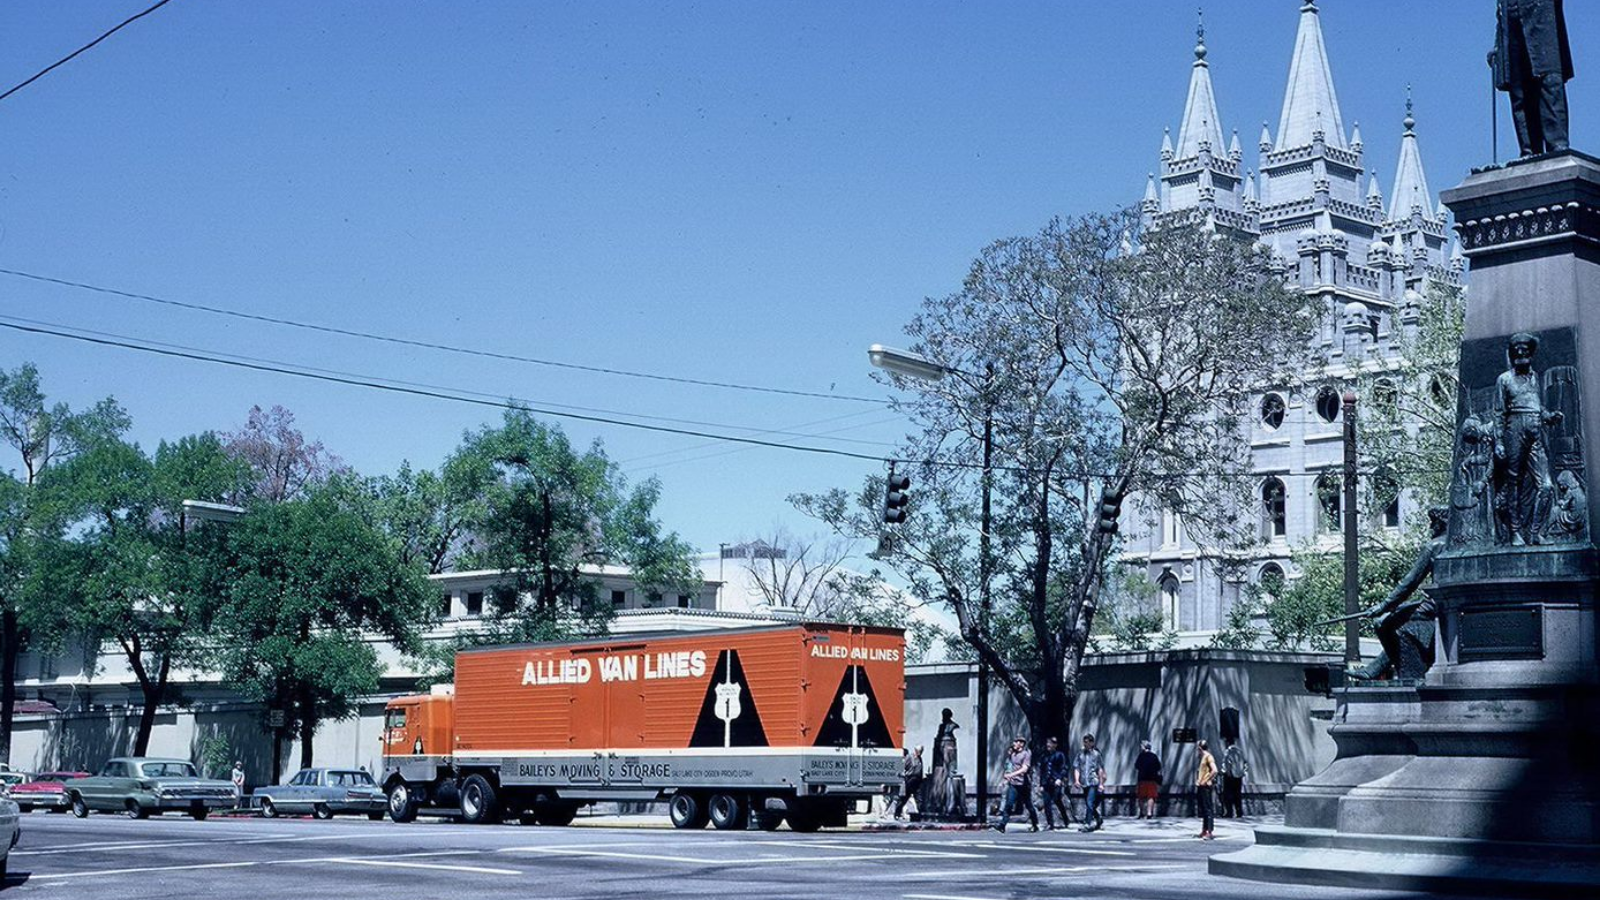 Vintage shot of Bailey's Allied truck outside a busy square.